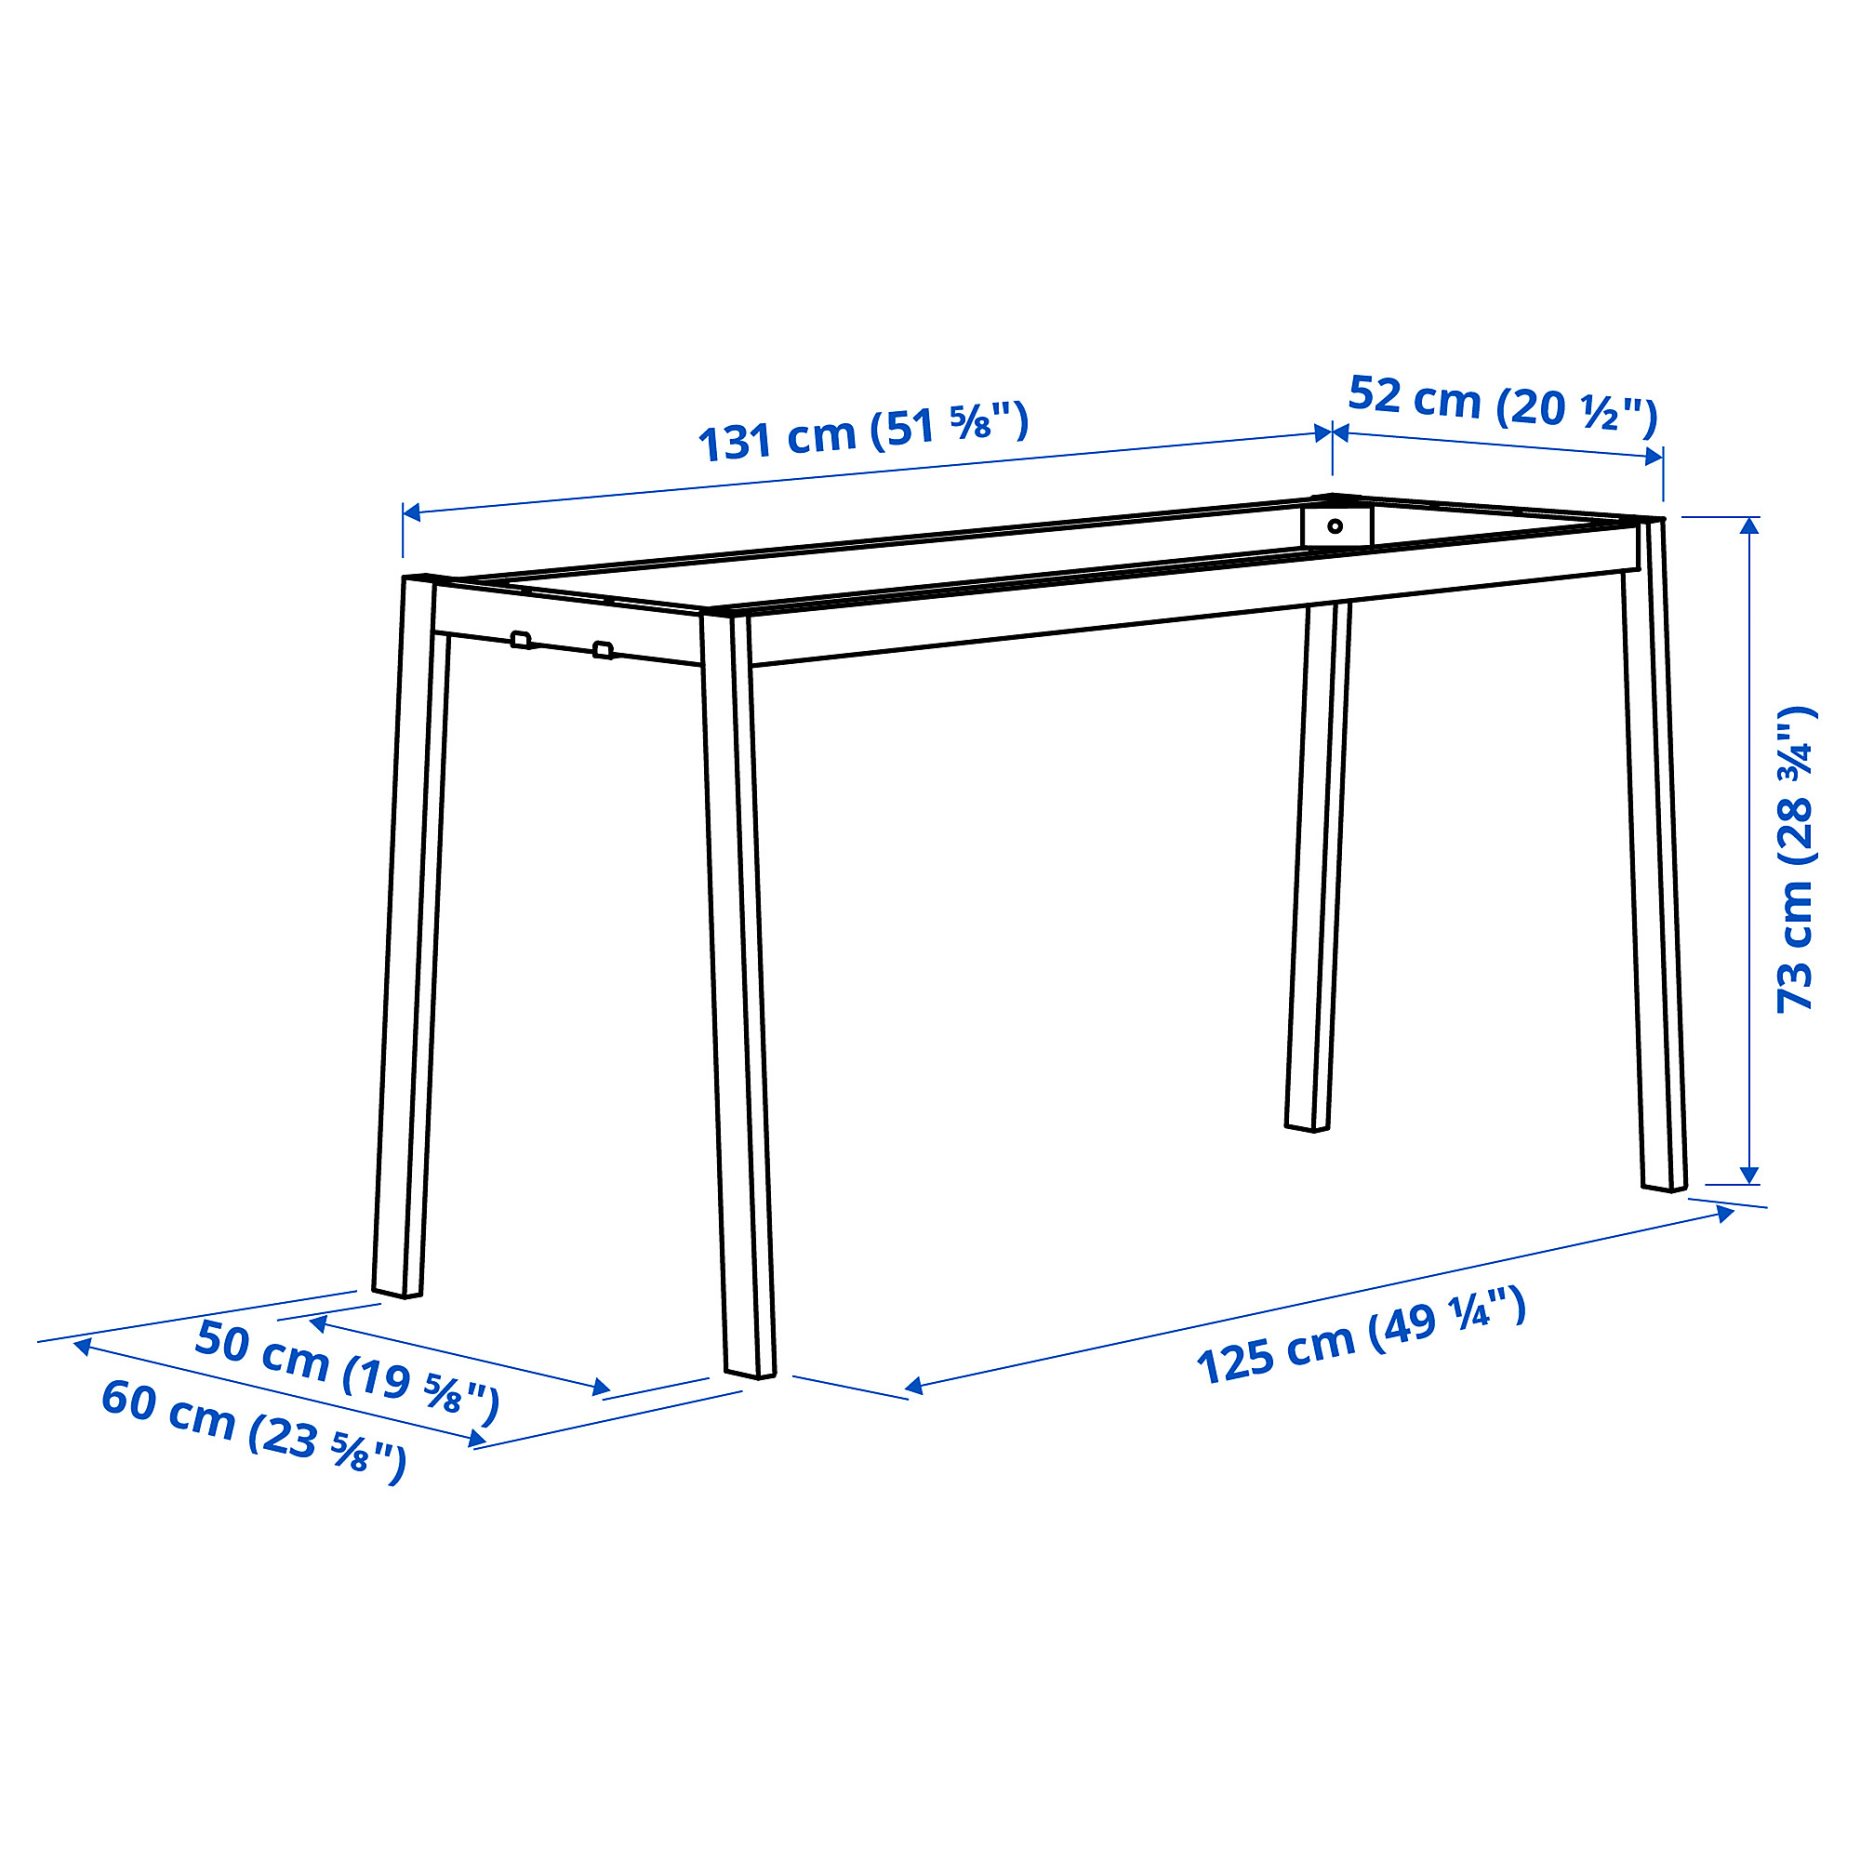 MITTZON, underframe for conference table, 140x68x73 cm, 305.445.71